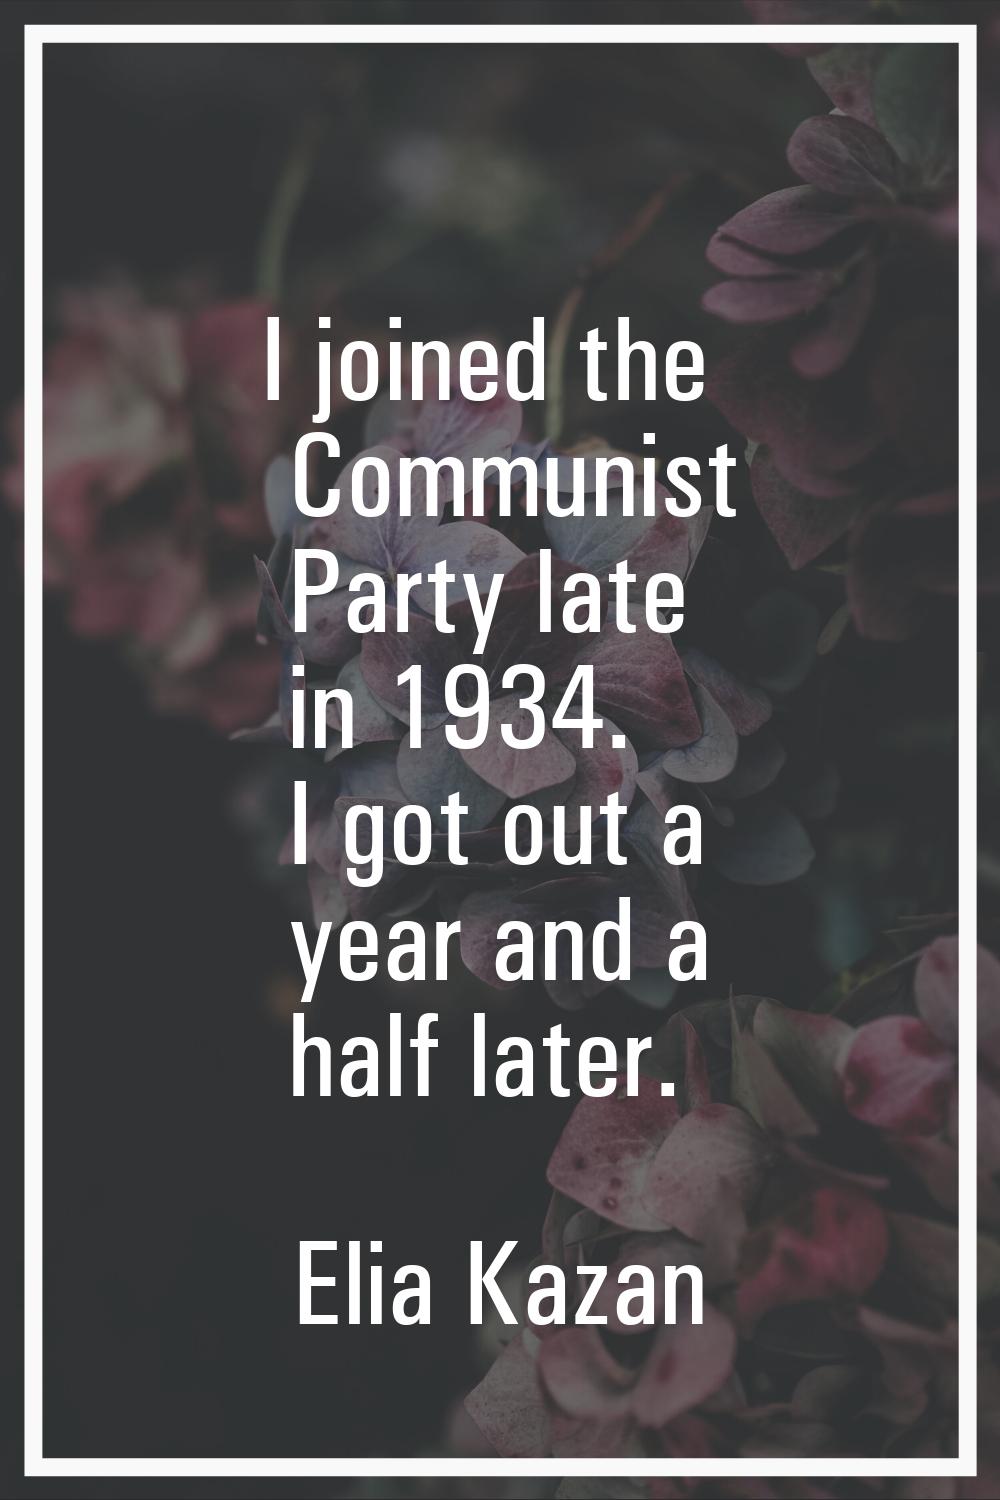 I joined the Communist Party late in 1934. I got out a year and a half later.